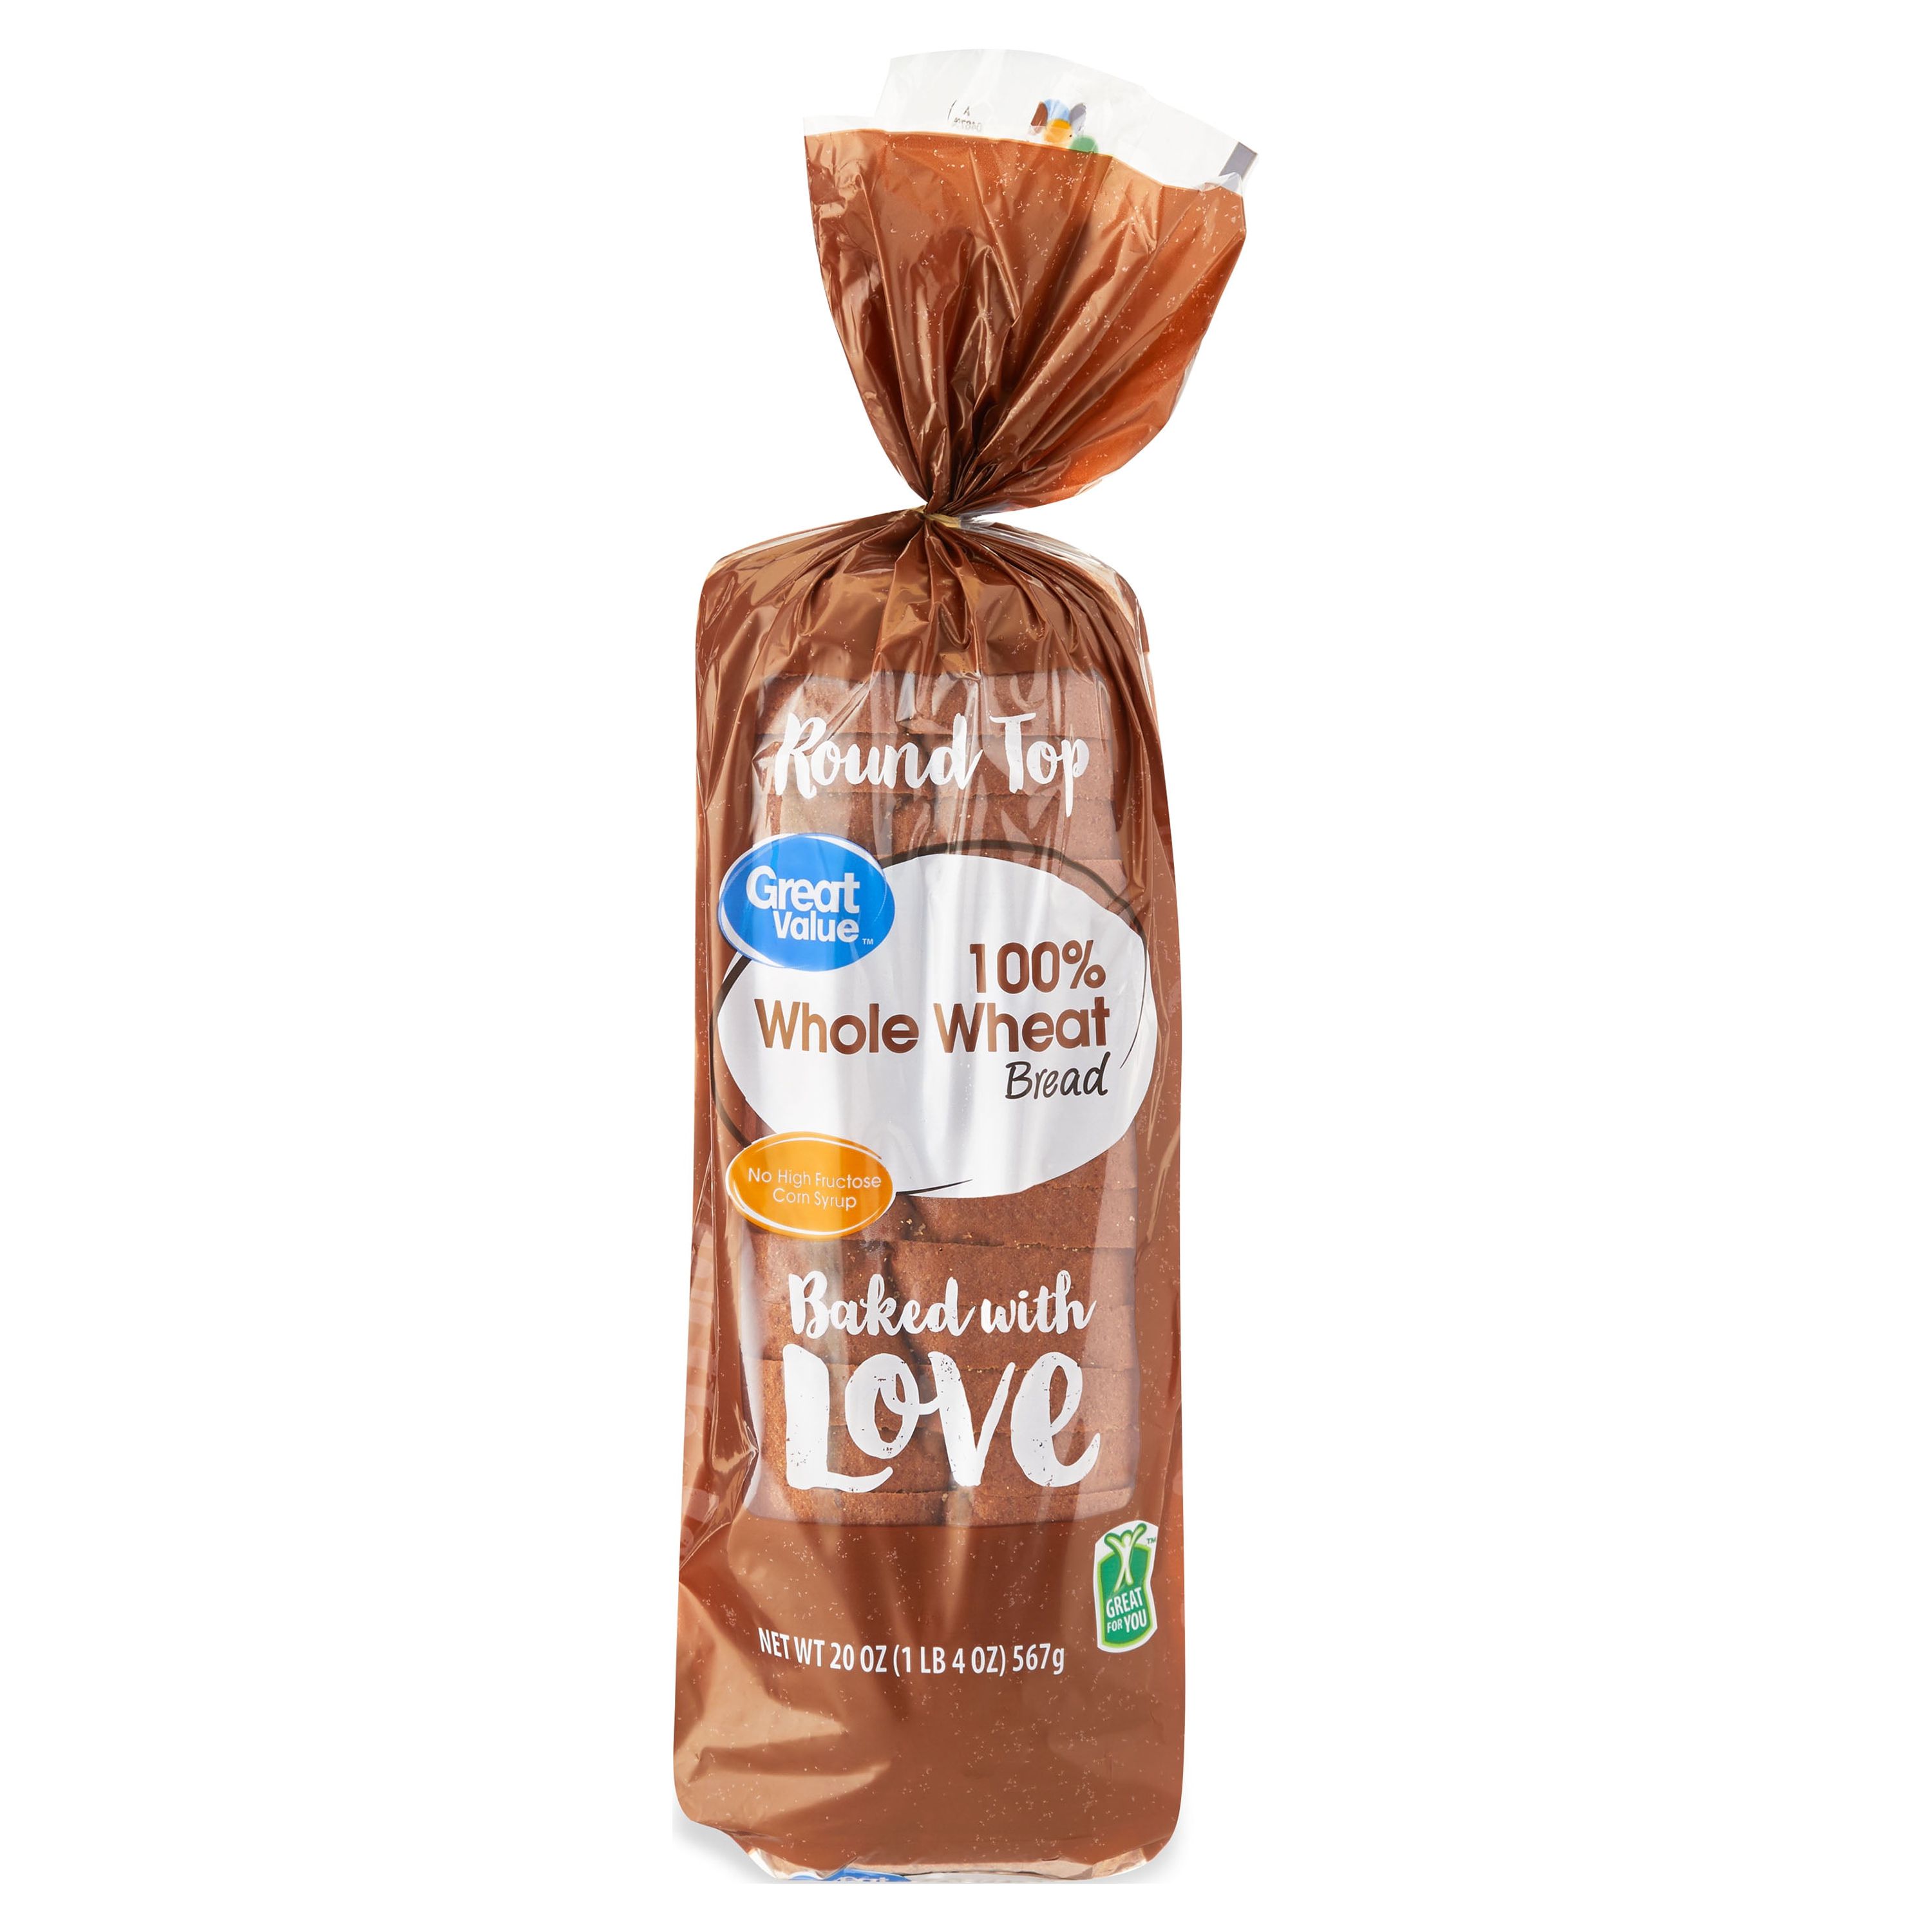 Great Value 100% Whole Wheat Round Top Bread, 20 oz - image 1 of 8